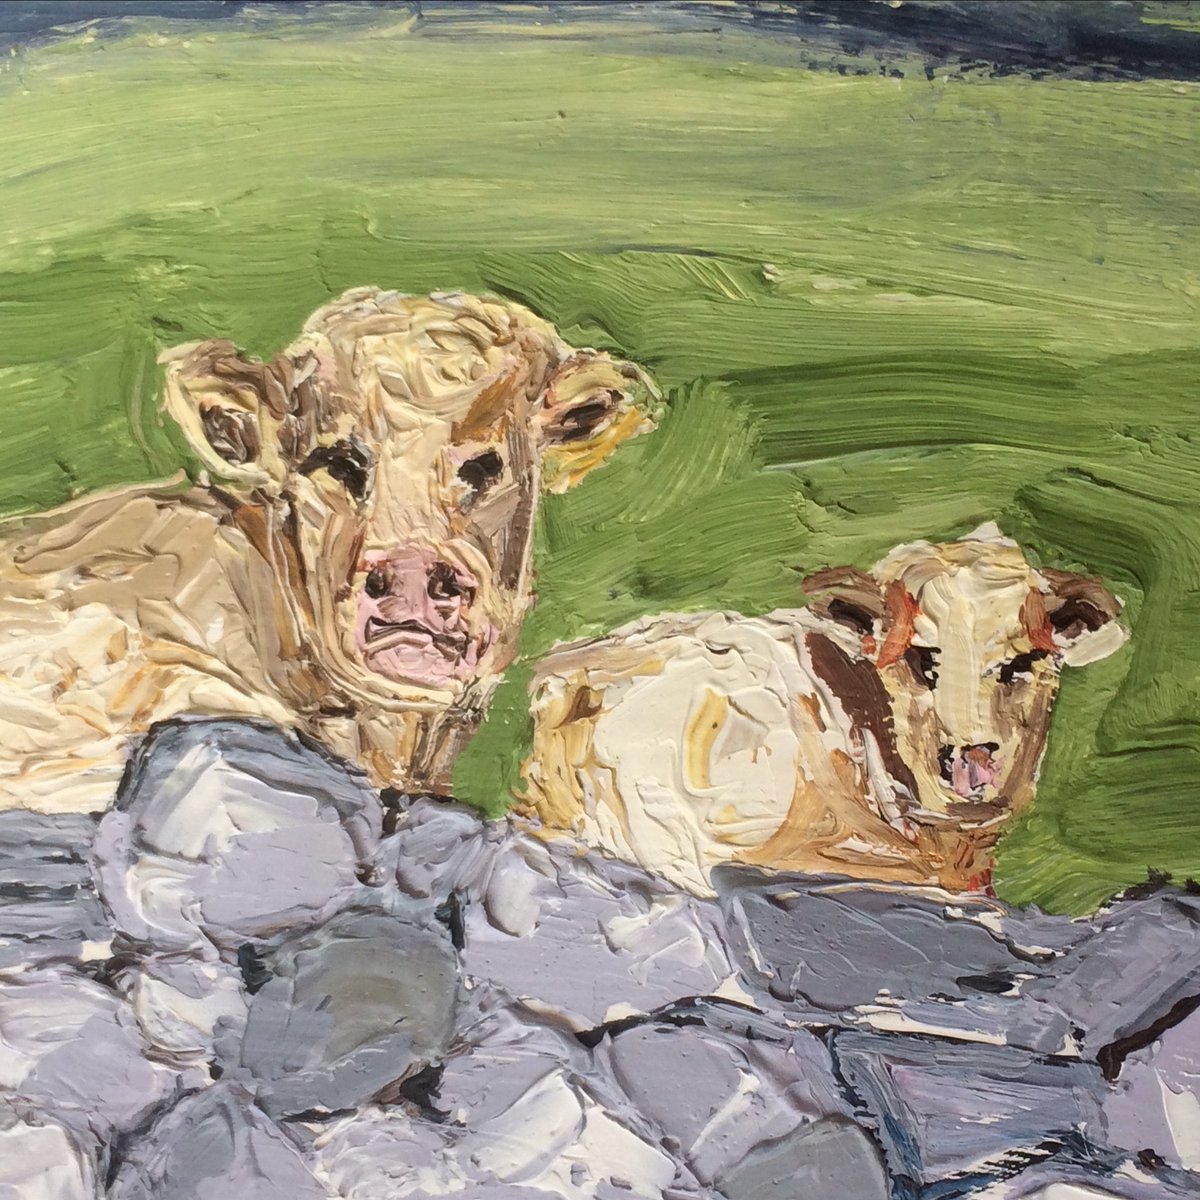 Off to live in Melbourne
#donegalmade #madeinireland #oilpainting #cowpainting #irishfarm #painting #irishart #madeinireland #donegaldiaspora #irishabroad #art #made #donegal #gallery